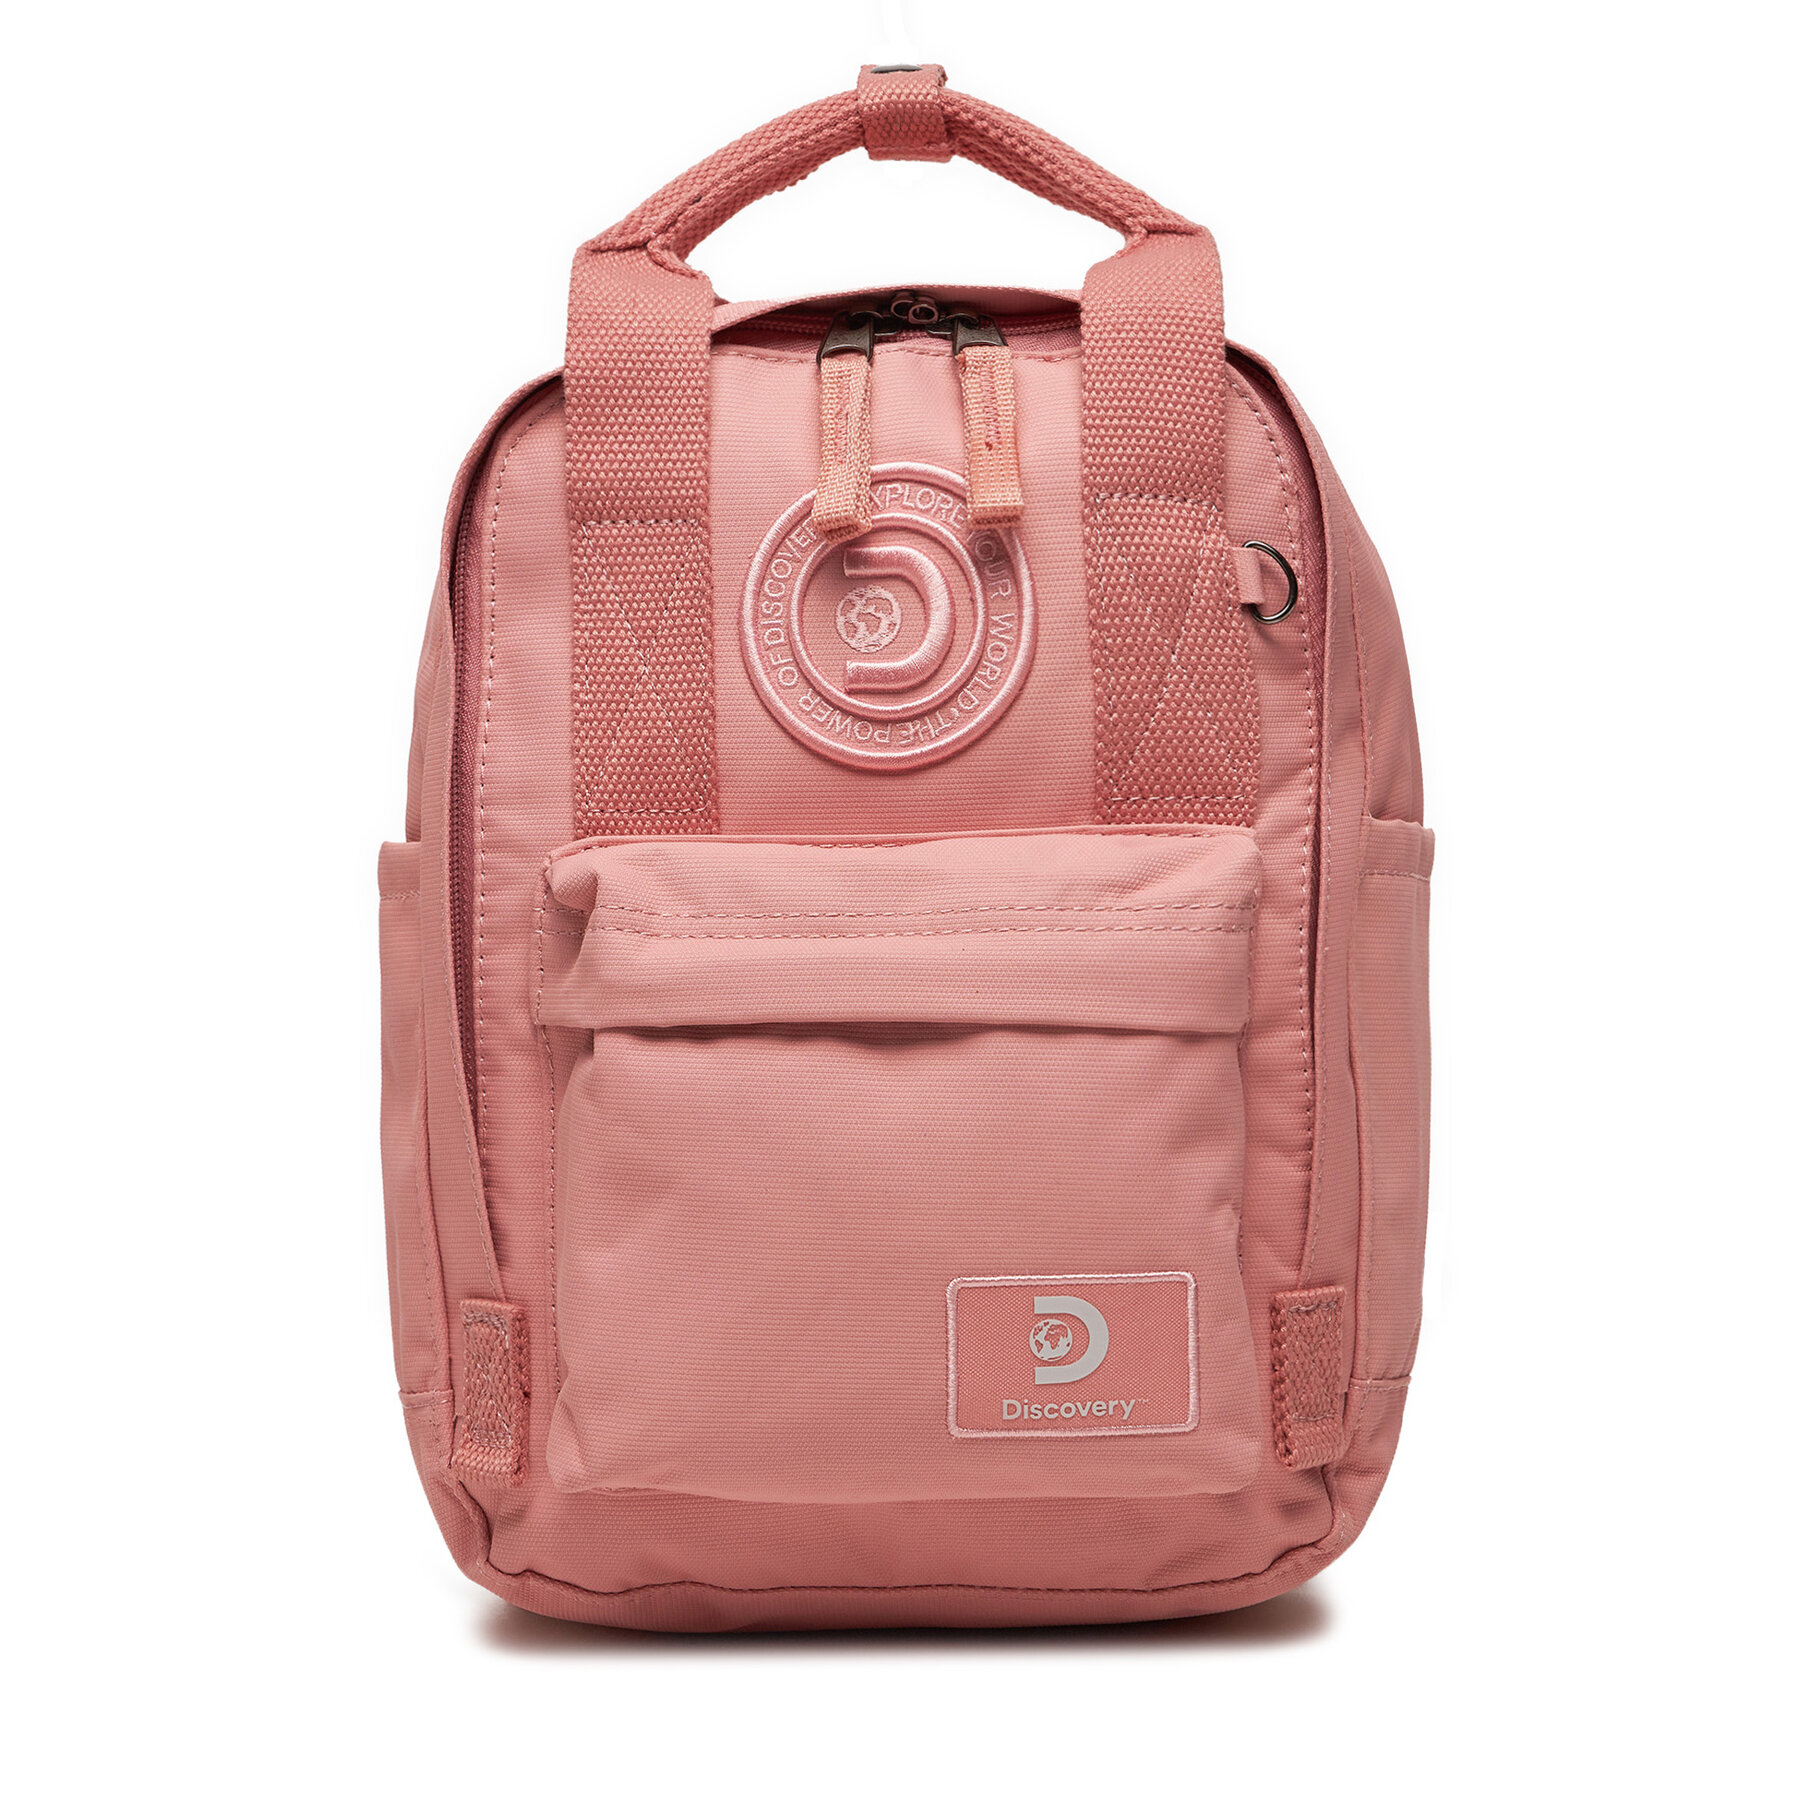 Rucksack Discovery Small D00811.16 Rosa von Discovery